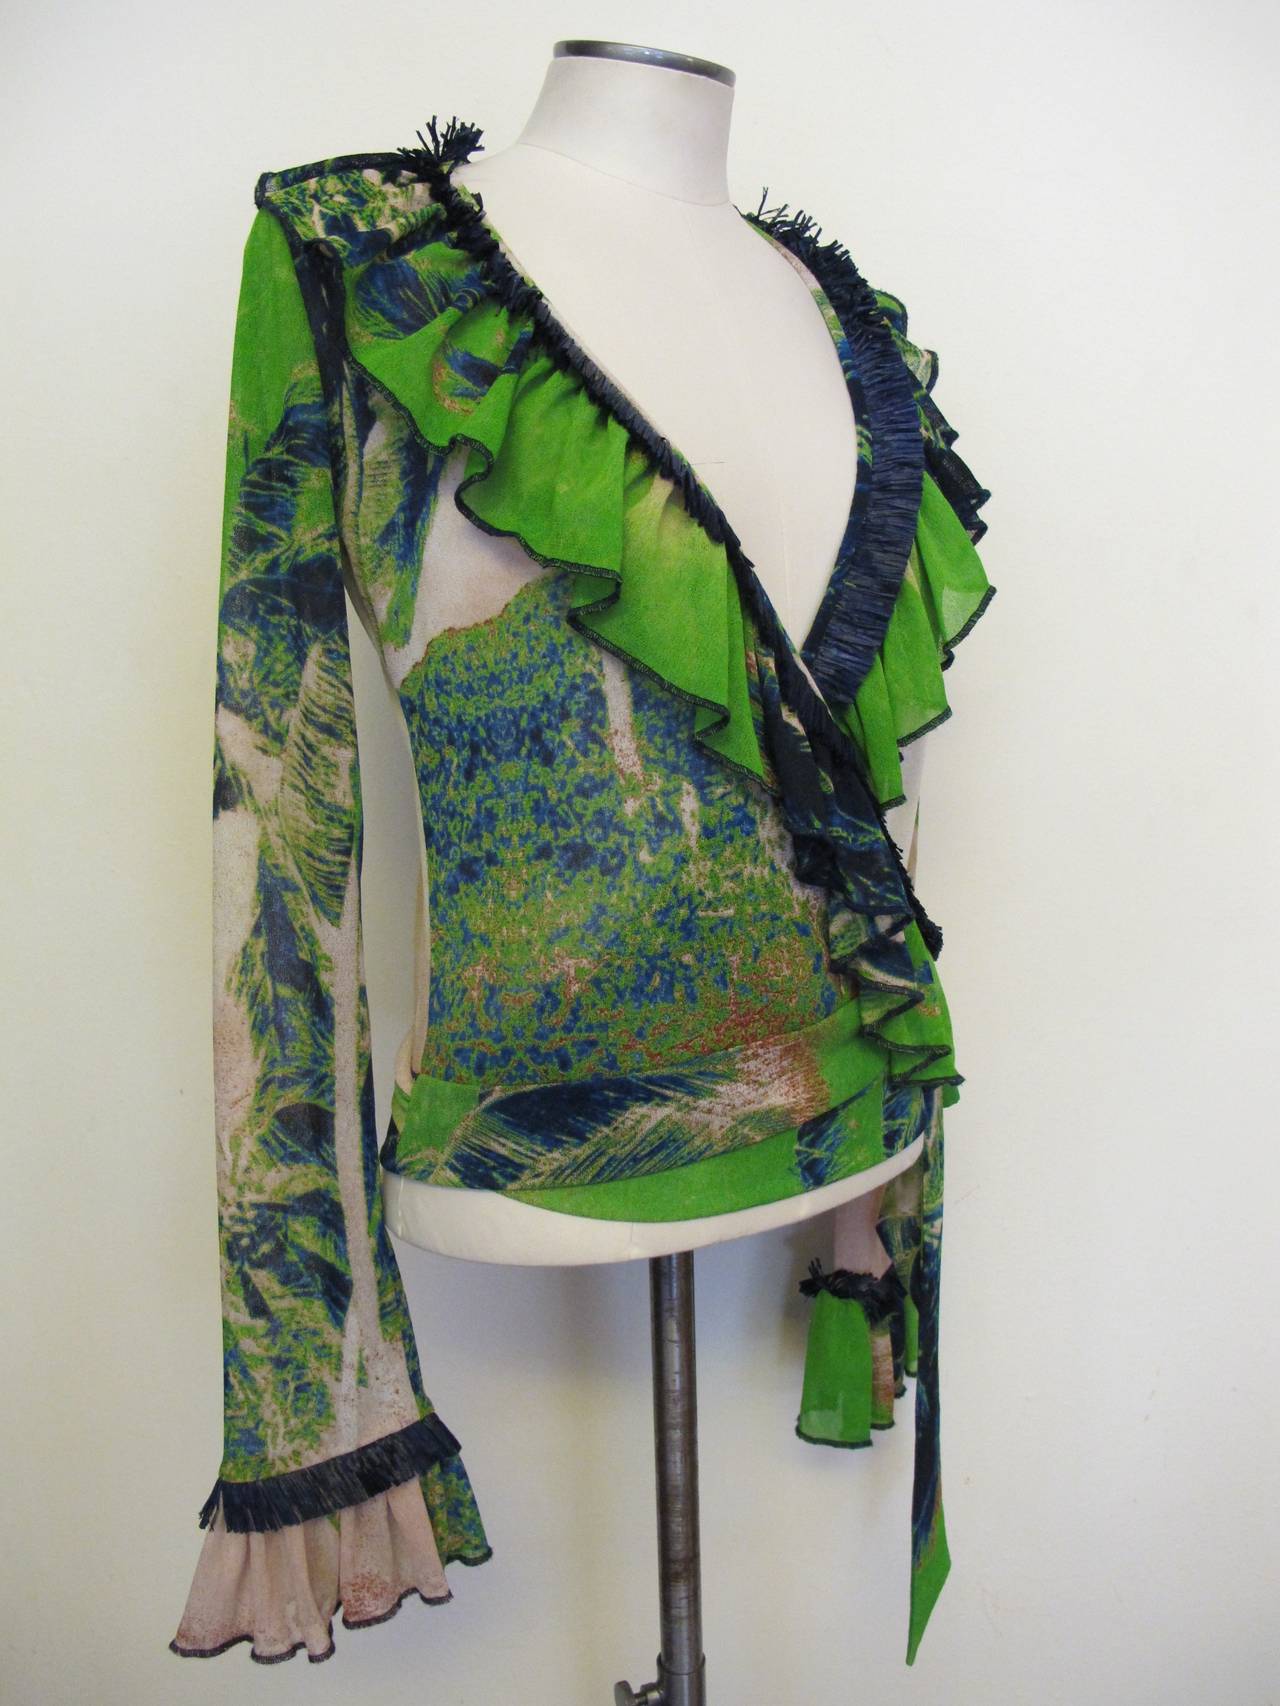 Fabulous wrap around Blouse with lush colors of royal blue and neon green. Palm trees can be seen in back. Sleeve length measures 26 inches.